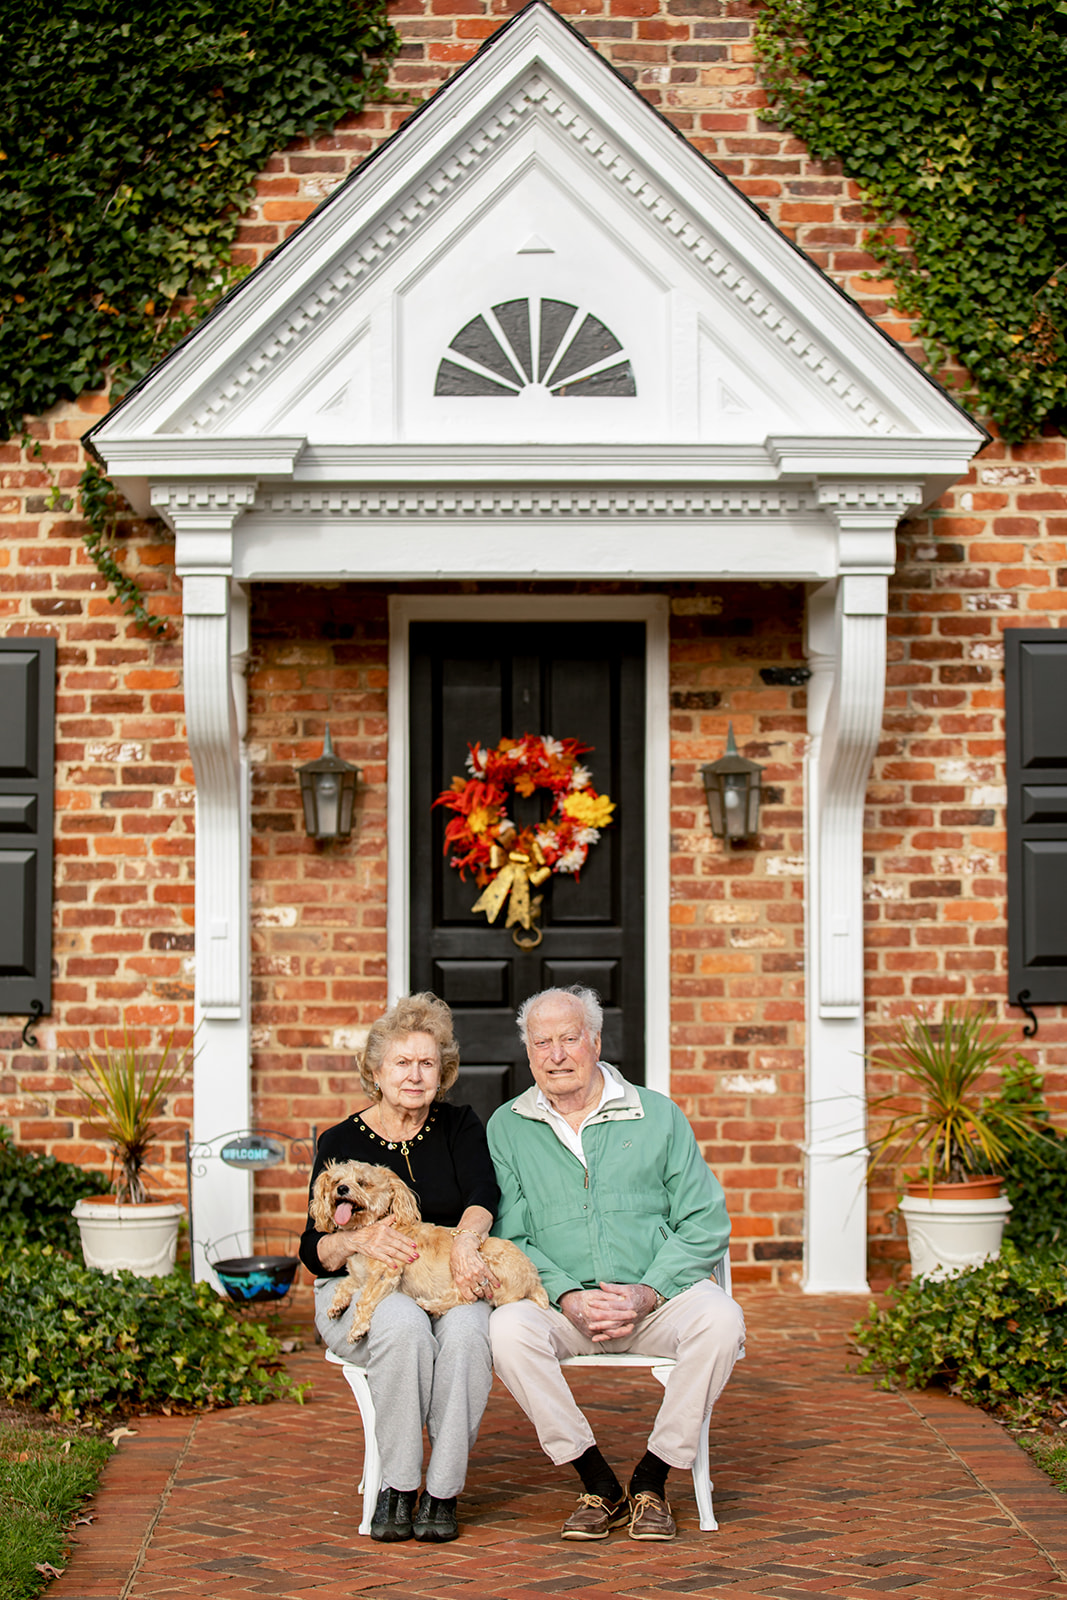 Thanksgiving Front Porch Mini Sessions - Image Property of www.j-dphoto.com